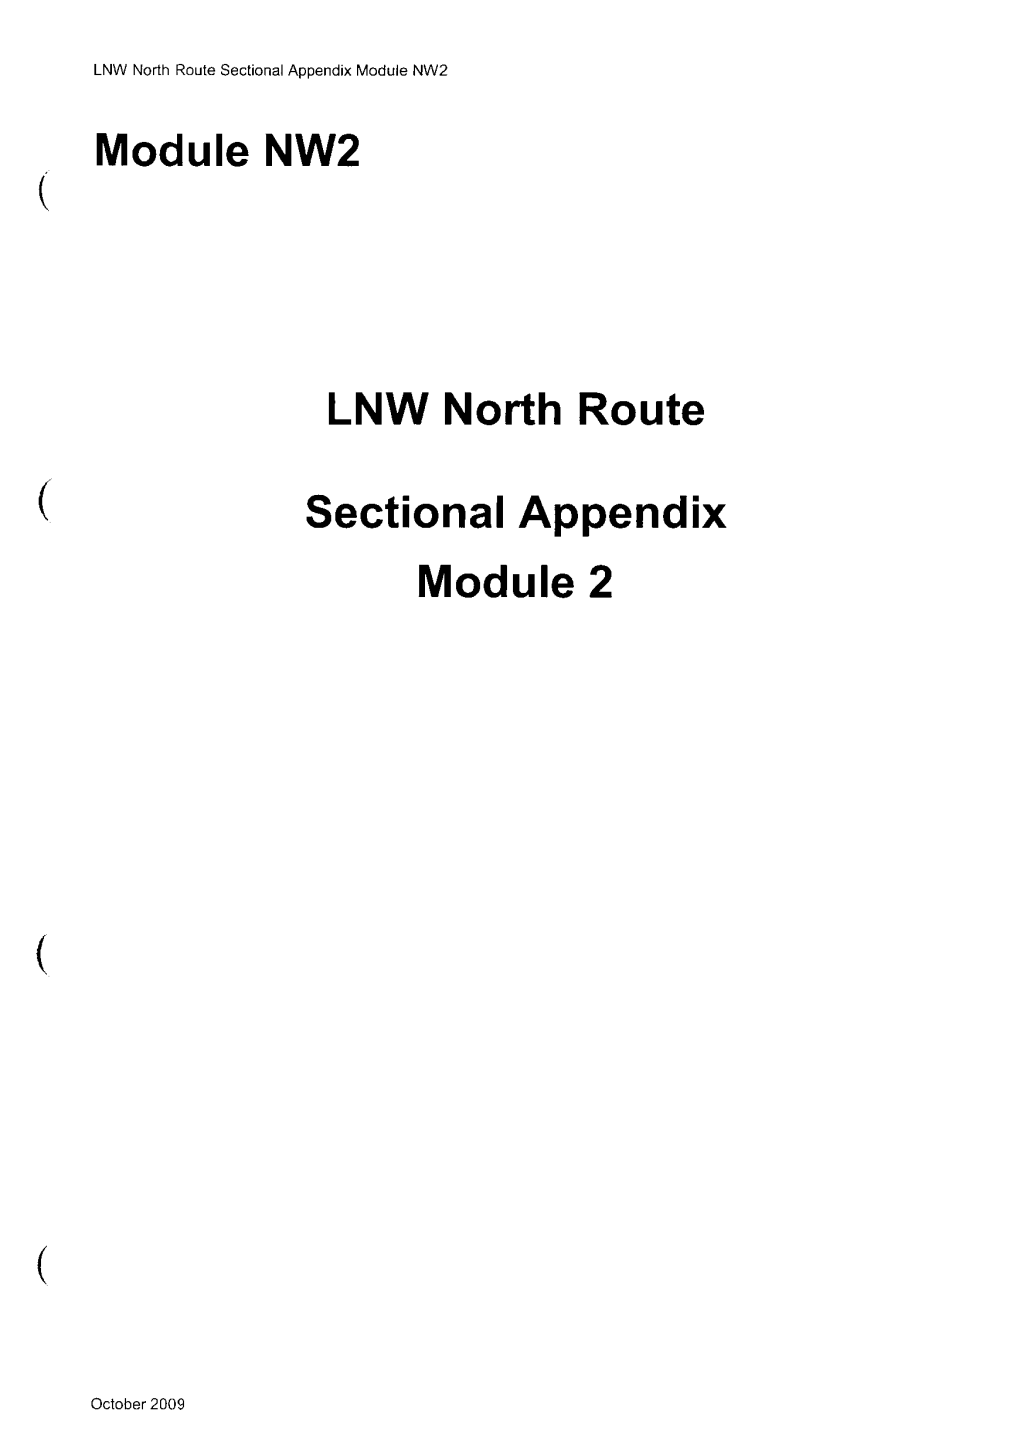 Module NW2 Sectional Appendix LNW North Route Module 2